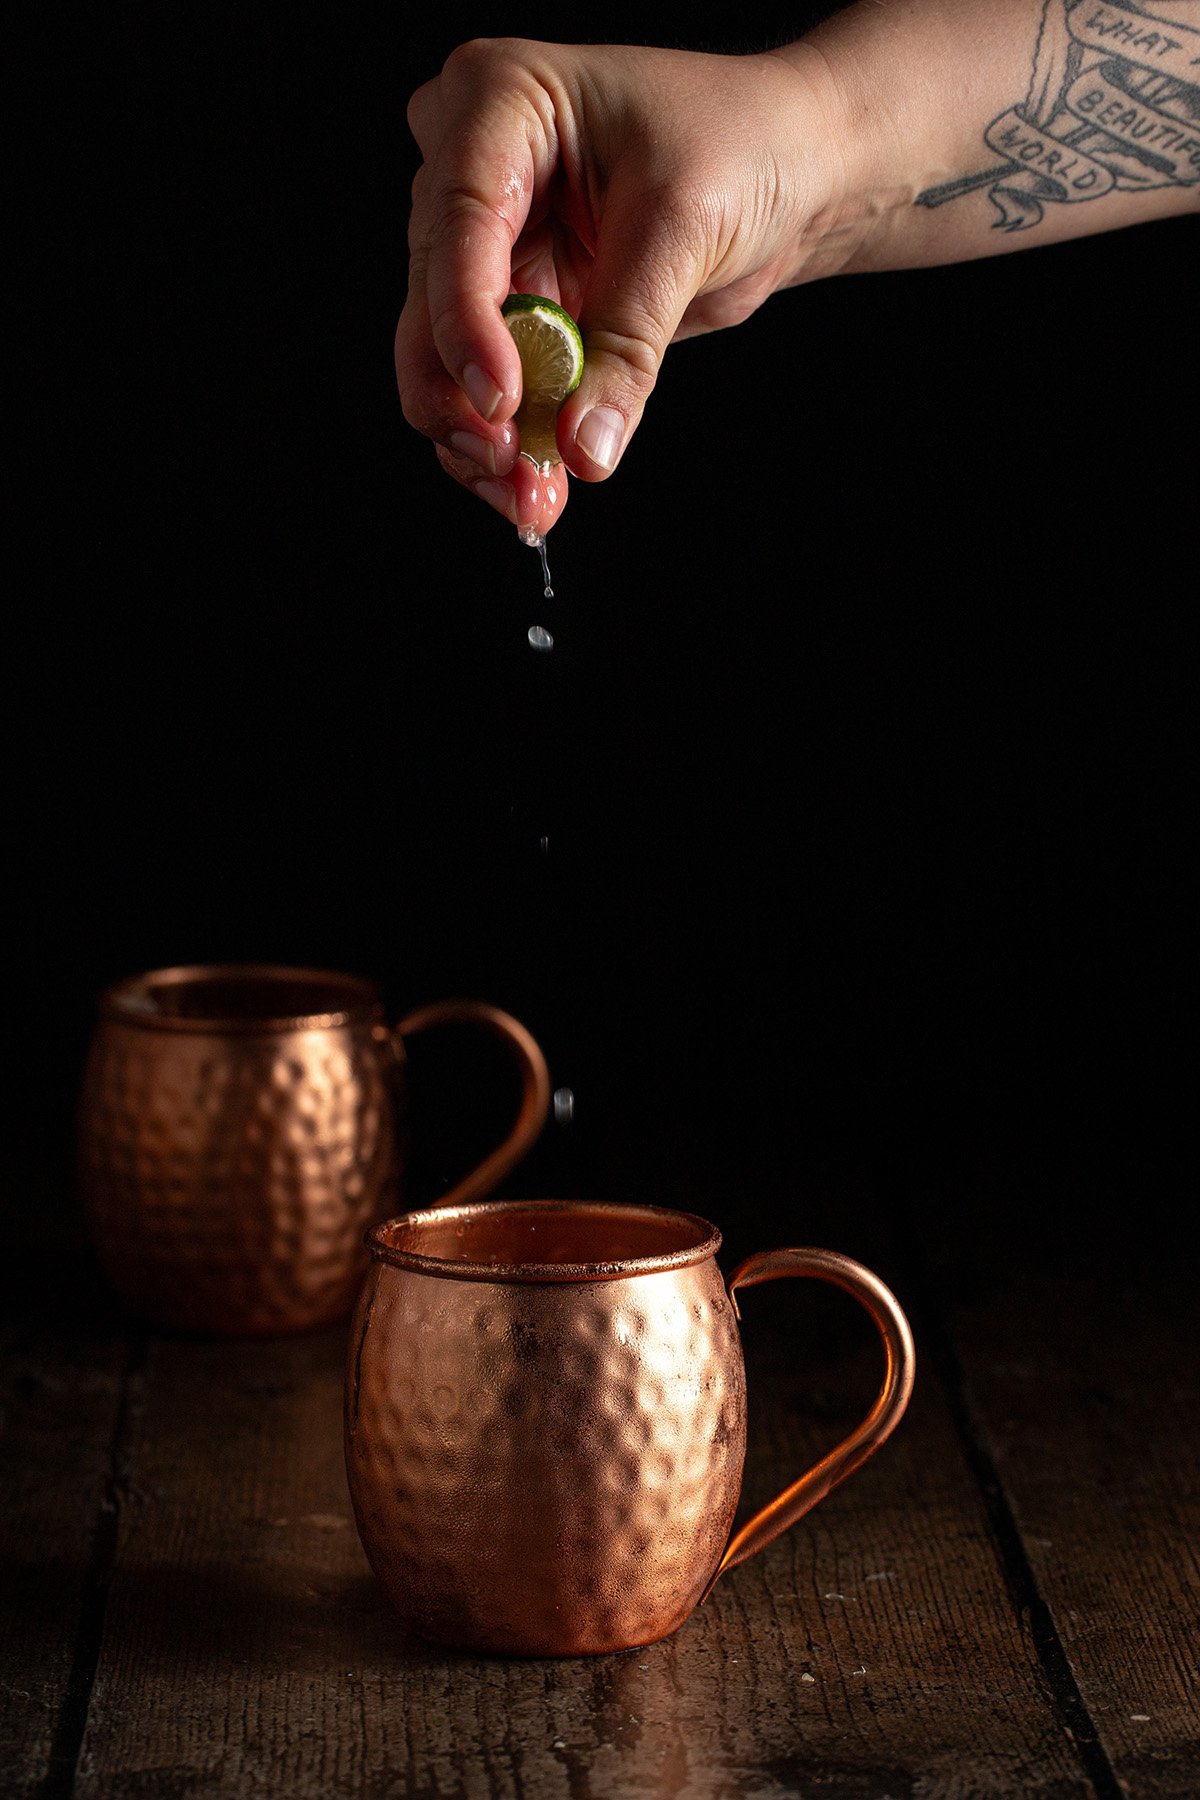 lime juice being squeezed into a copper mug.